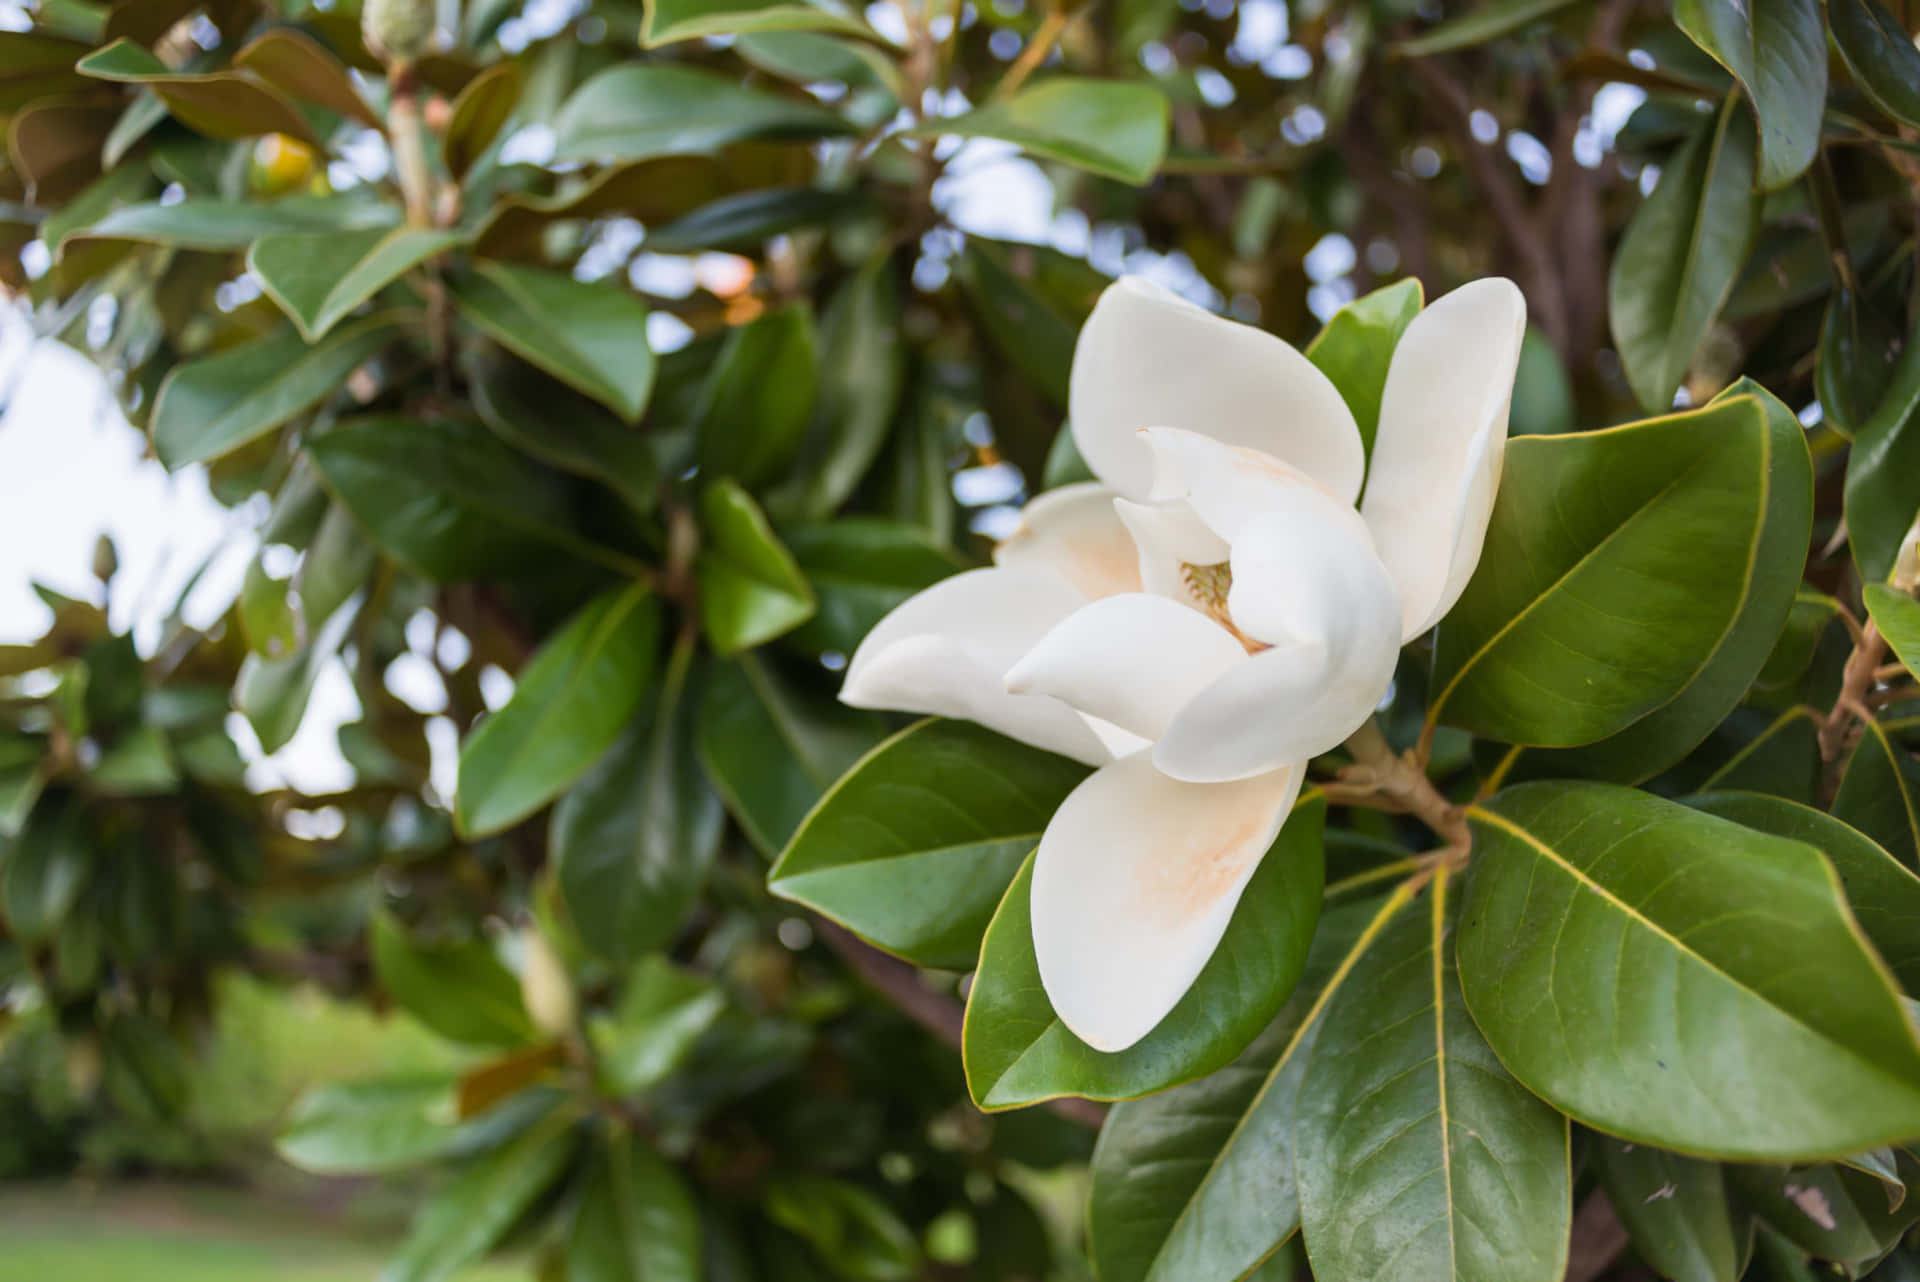 A Magnolia Flower Blossoming Outdoors In The Sun